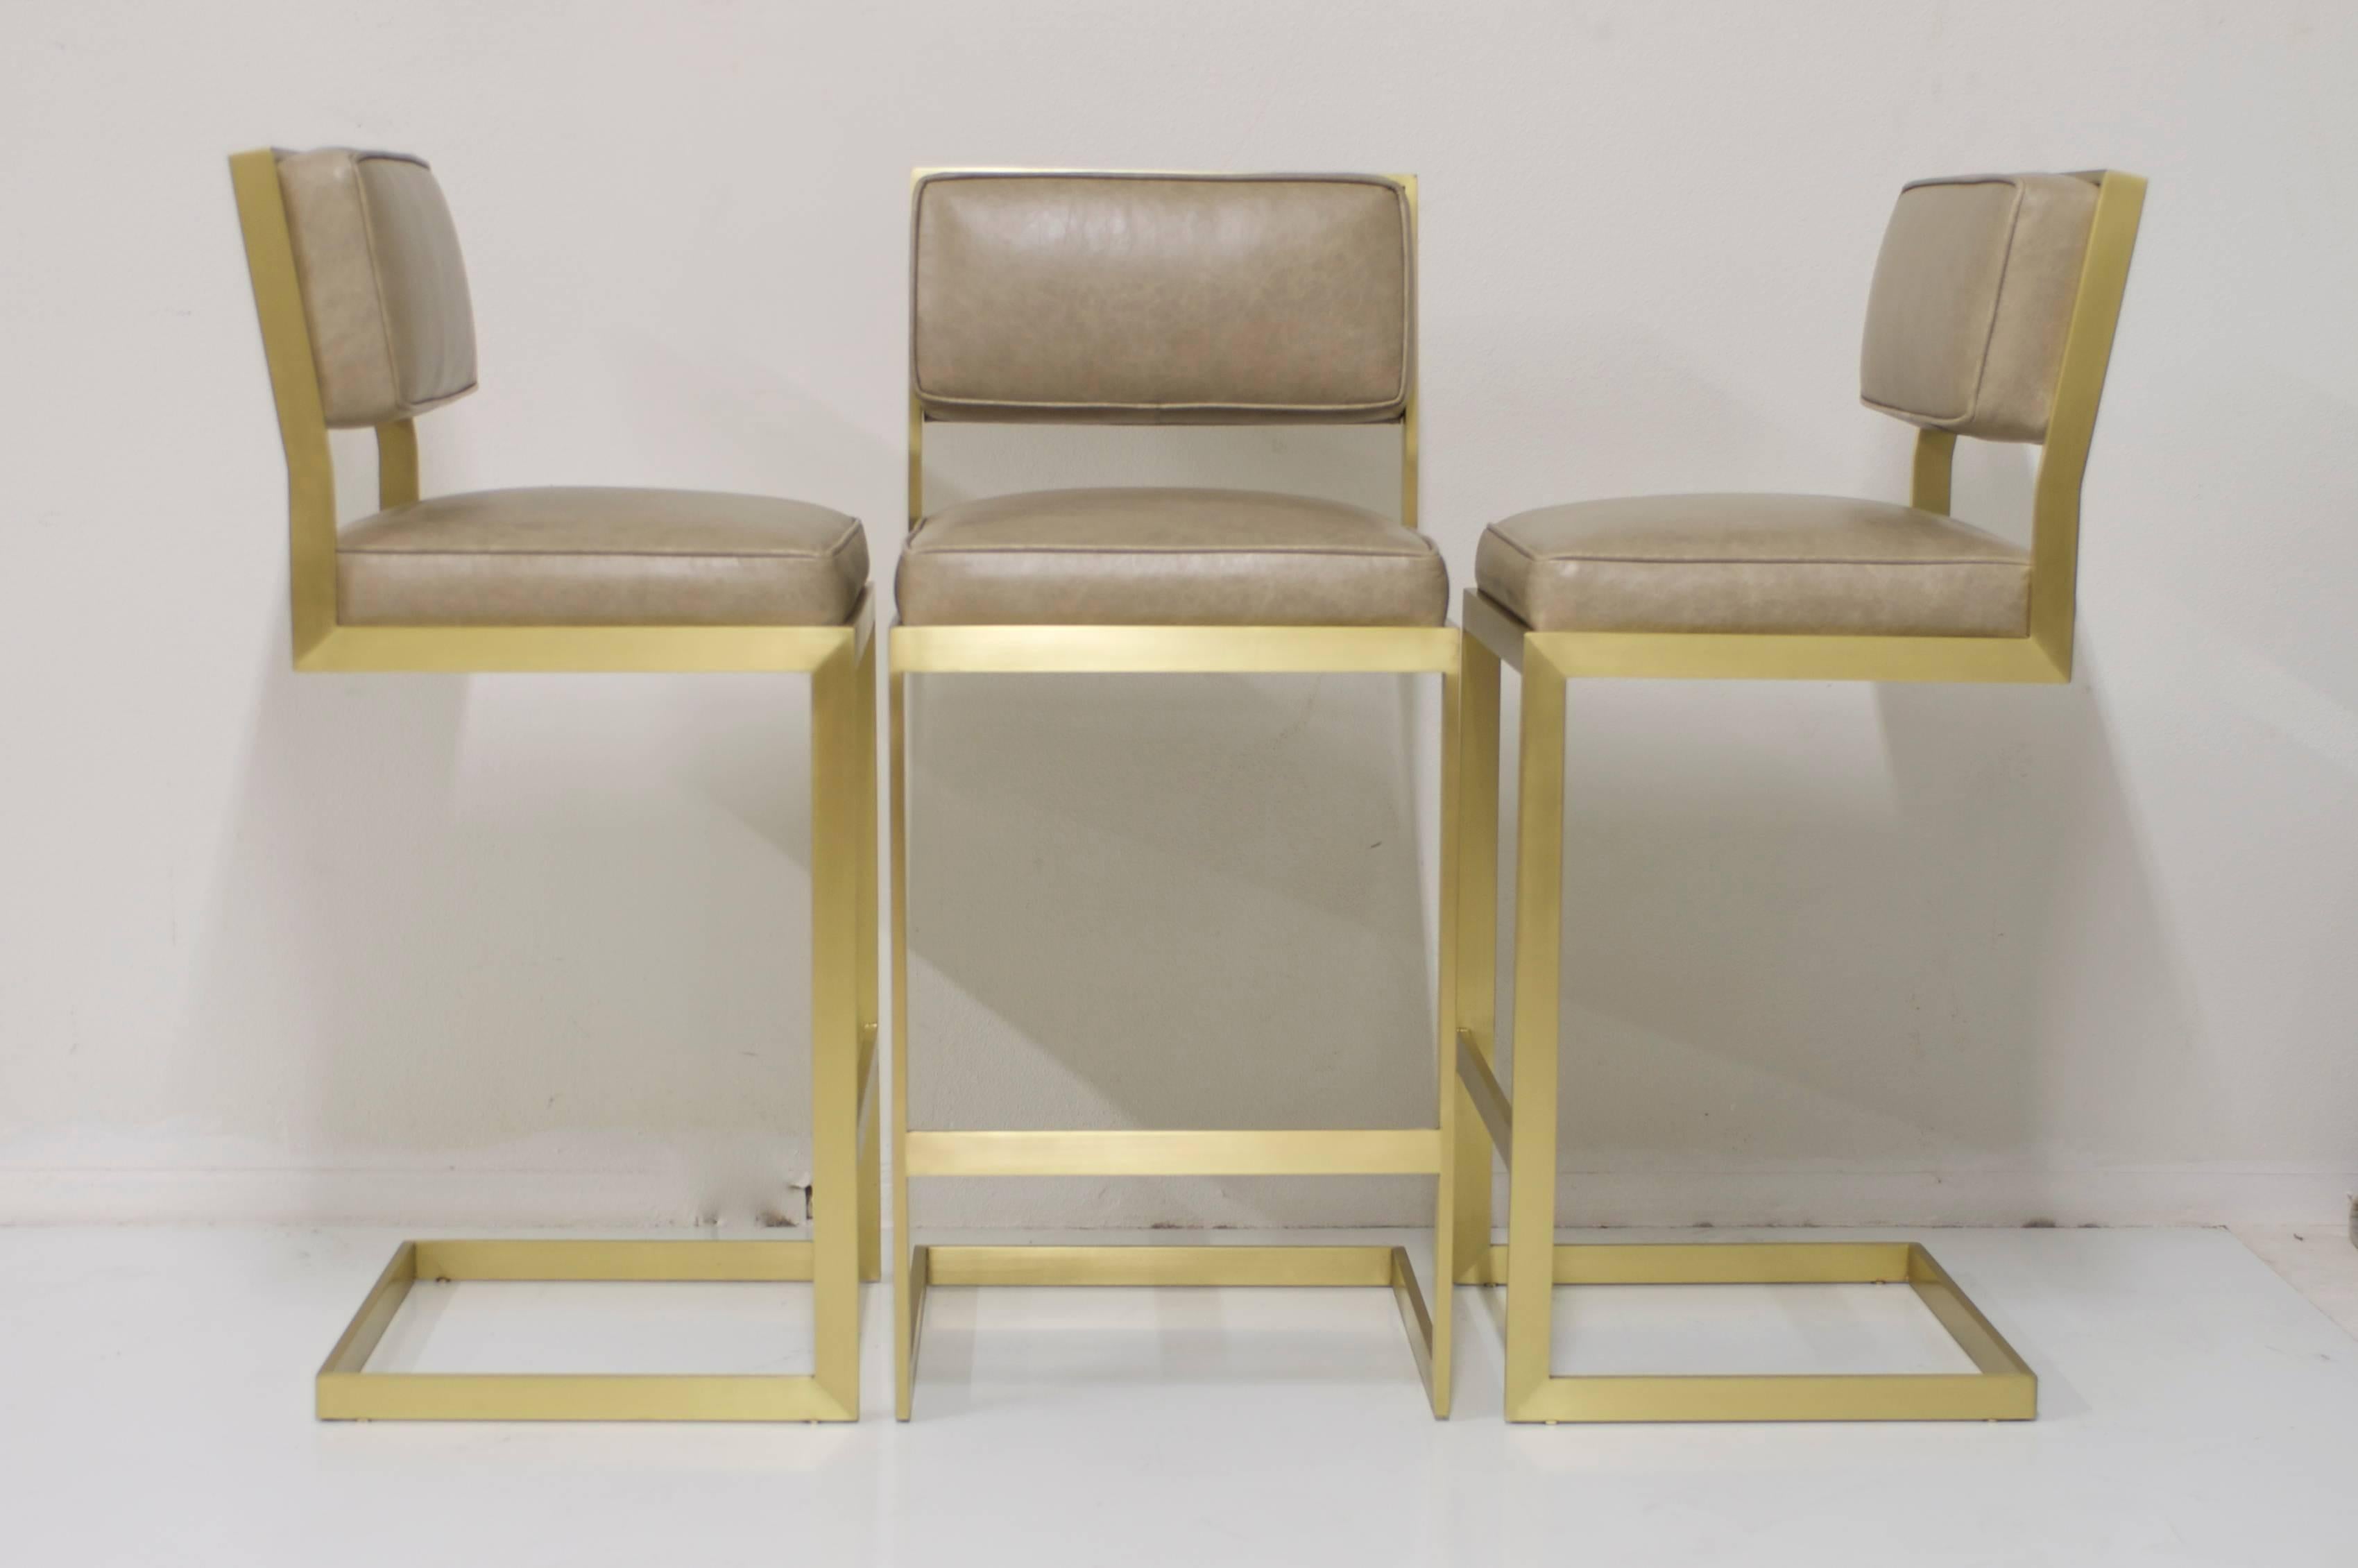 In the style of Milo Baughman this set of three bar stools have been plated in a beautiful brushed matte brass finish. They are a nice modern rectangular design made with flat bar steel and have a footrest. The seat and back are upholstered in a